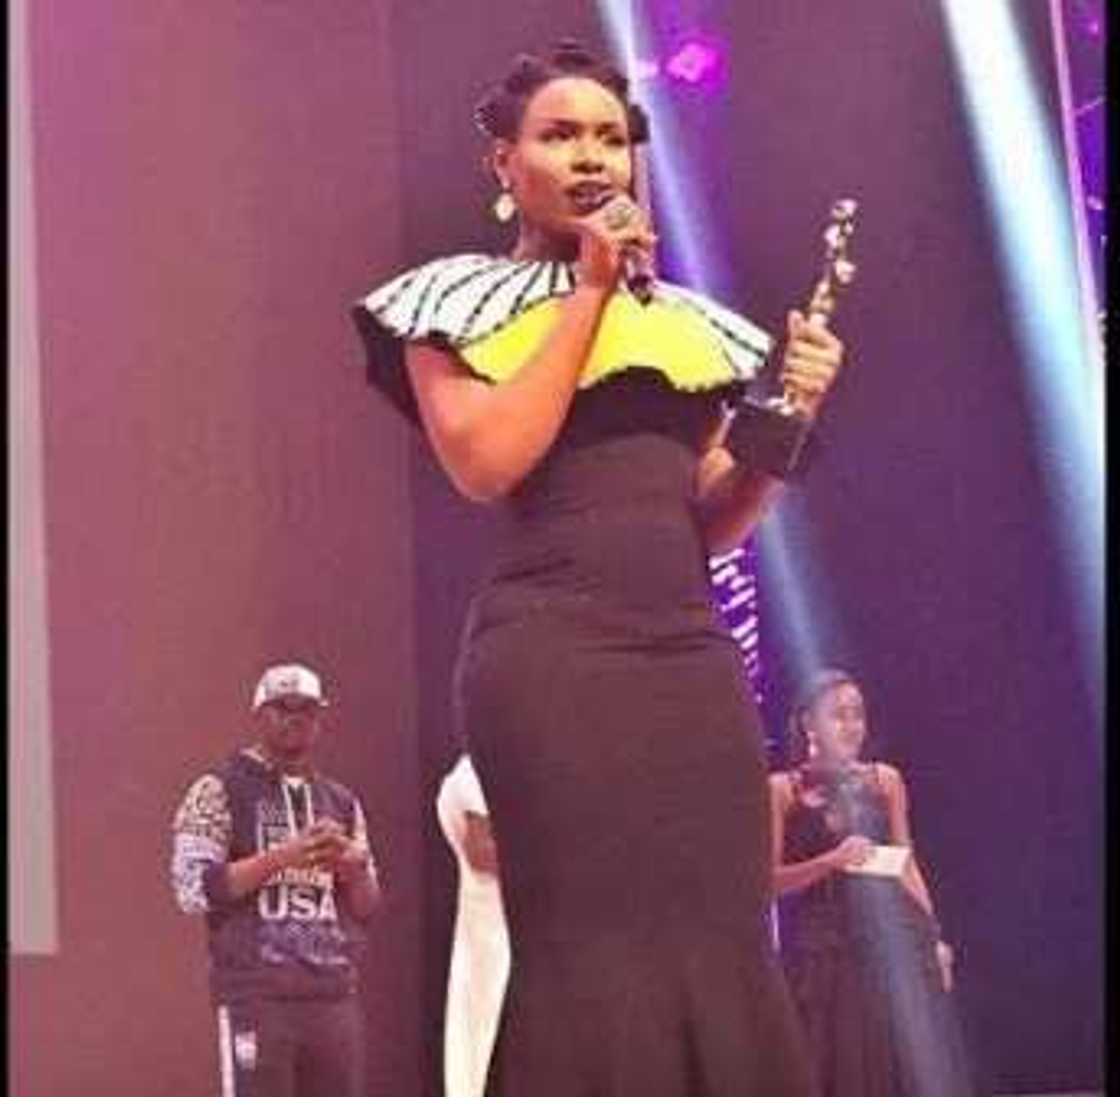 Moments From 10th NEA Awards And List Of Winners [PICTURES]